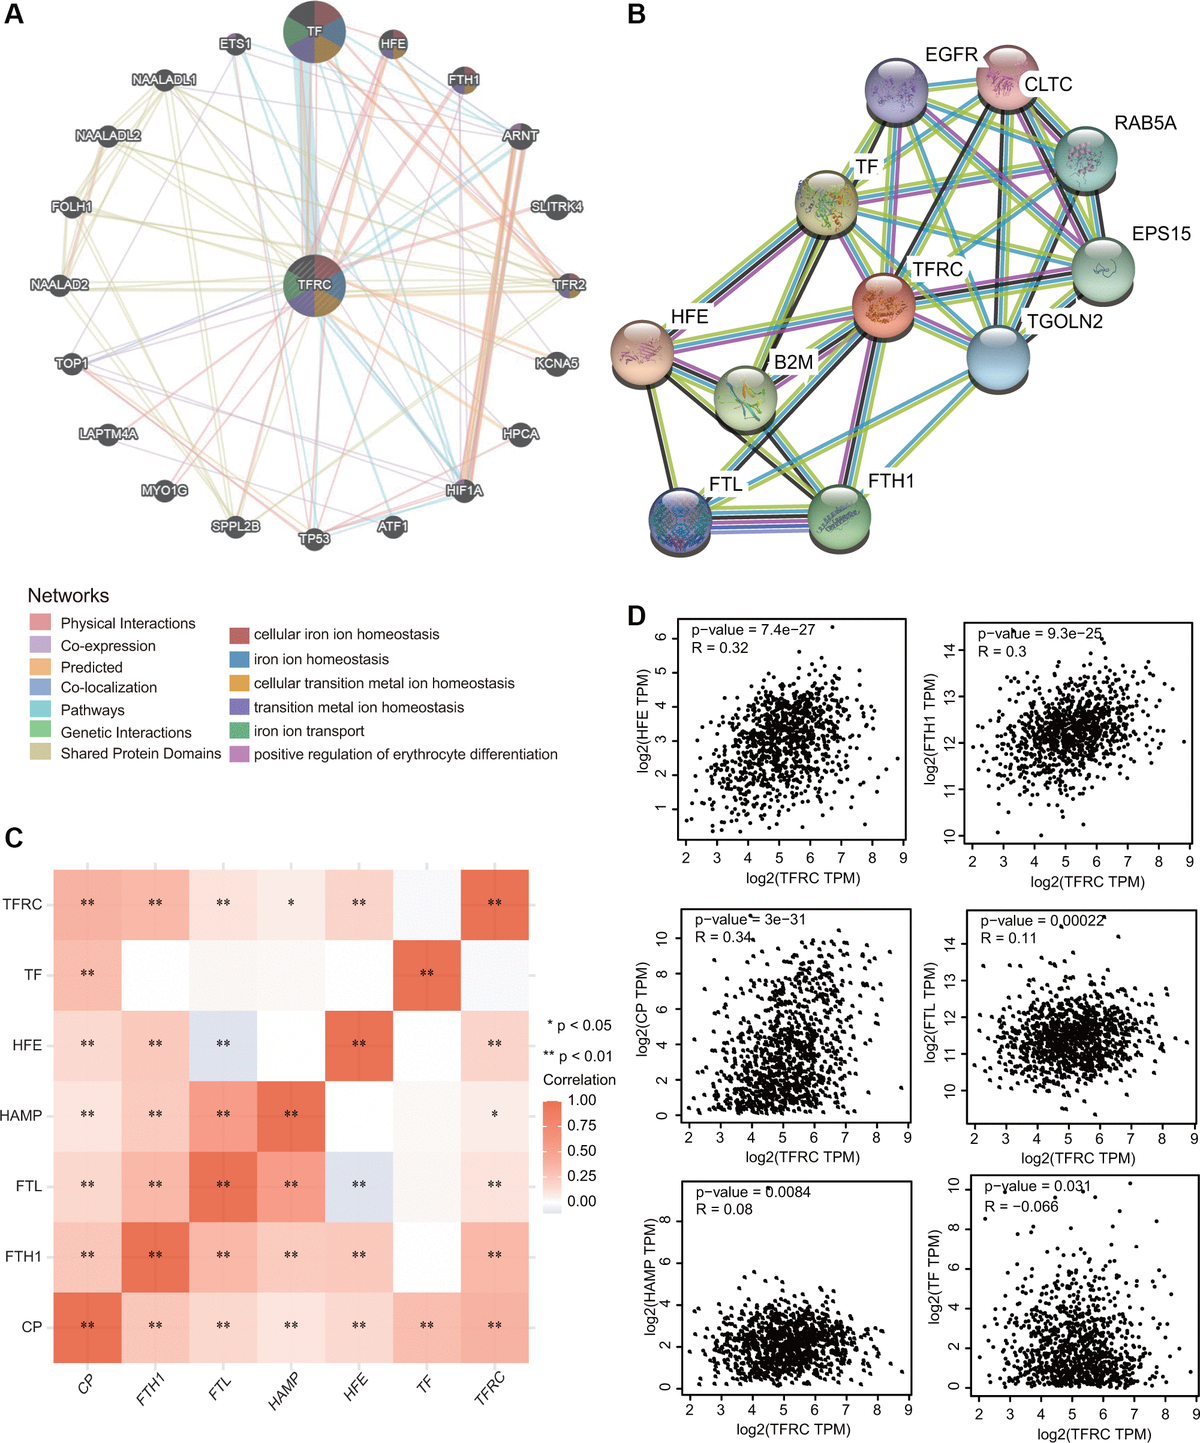 Interaction network of TfR1 in BC. (A, B) The gene-gene interaction and PPI network of TfR1 were constructed using GeneMANIA and STRING, respectively. (C) The heat map showing the correlations of TfR1 and various iron-related genes. (D) Scatterplots showing the correlations of TfR1 expression and HFE, FTH1, CP, FTL, HAMP and TF in BC through GEPIA database. ***